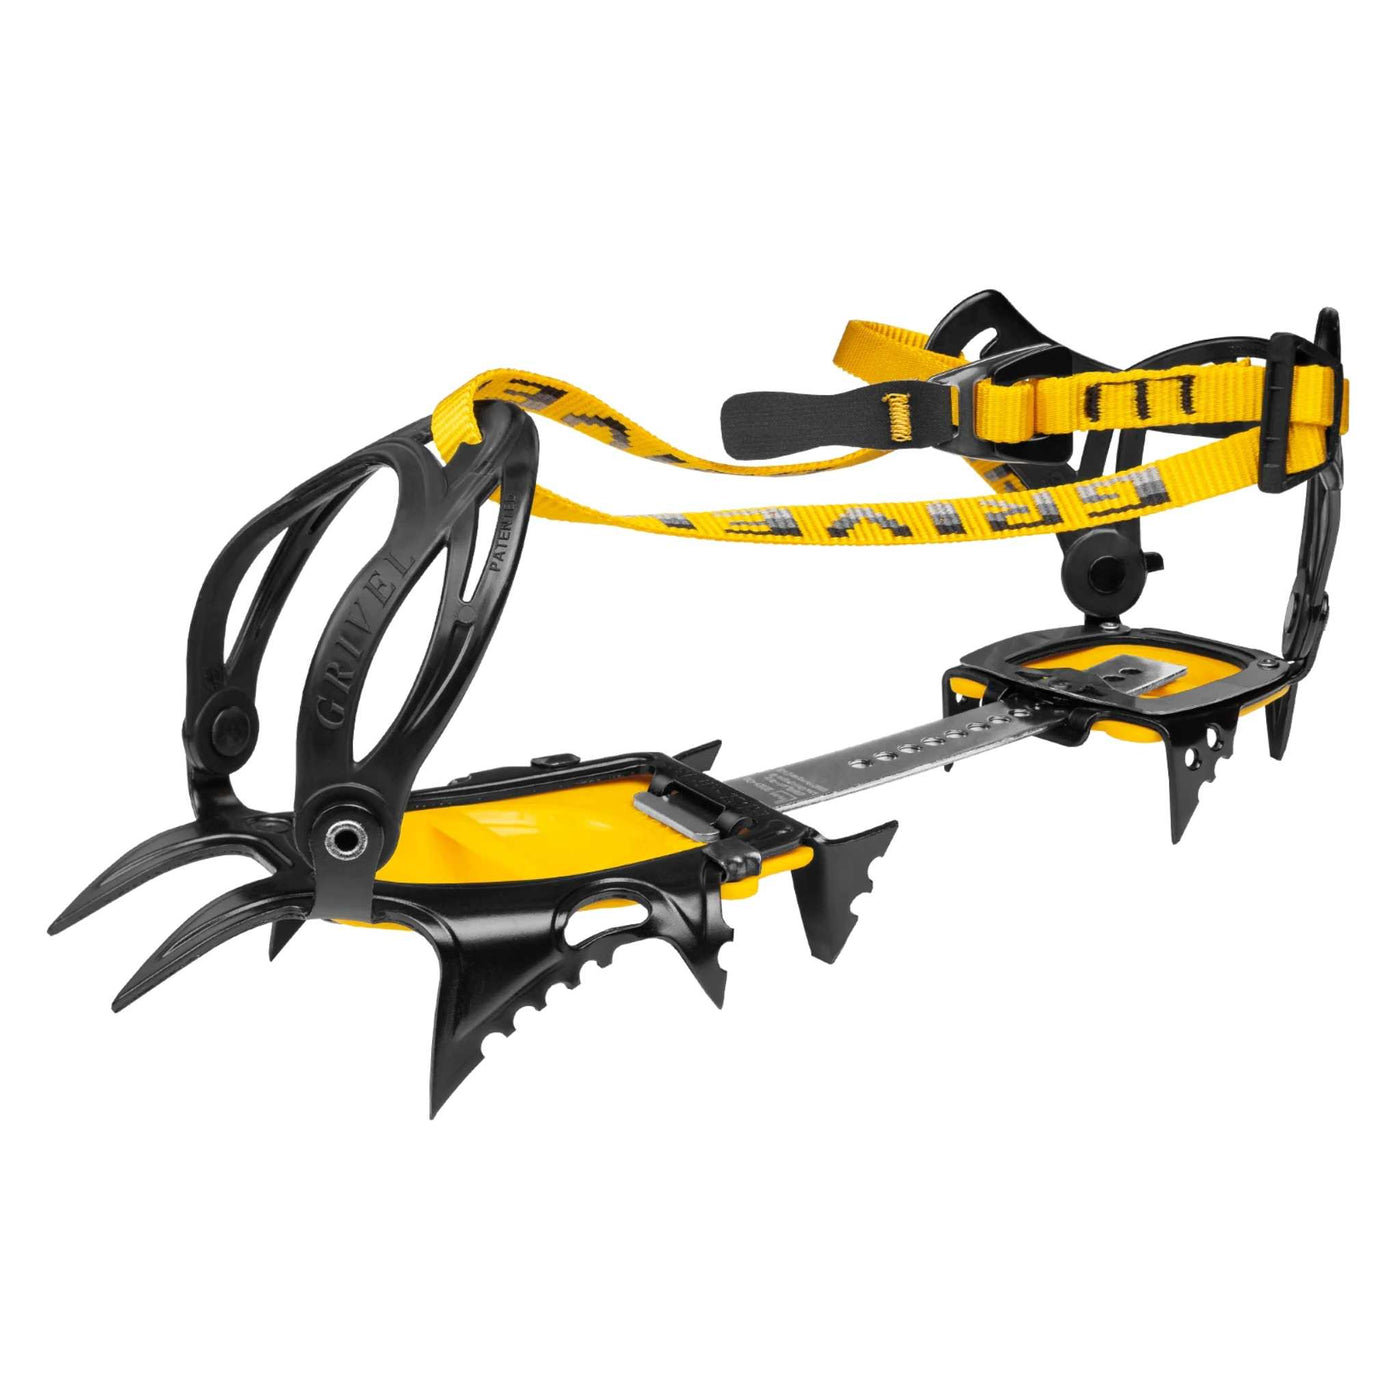 Grivel Air Tech Evo Crampon - New Classic | Technical Mountaineering Crampons | Further Faster Christchurch NZ